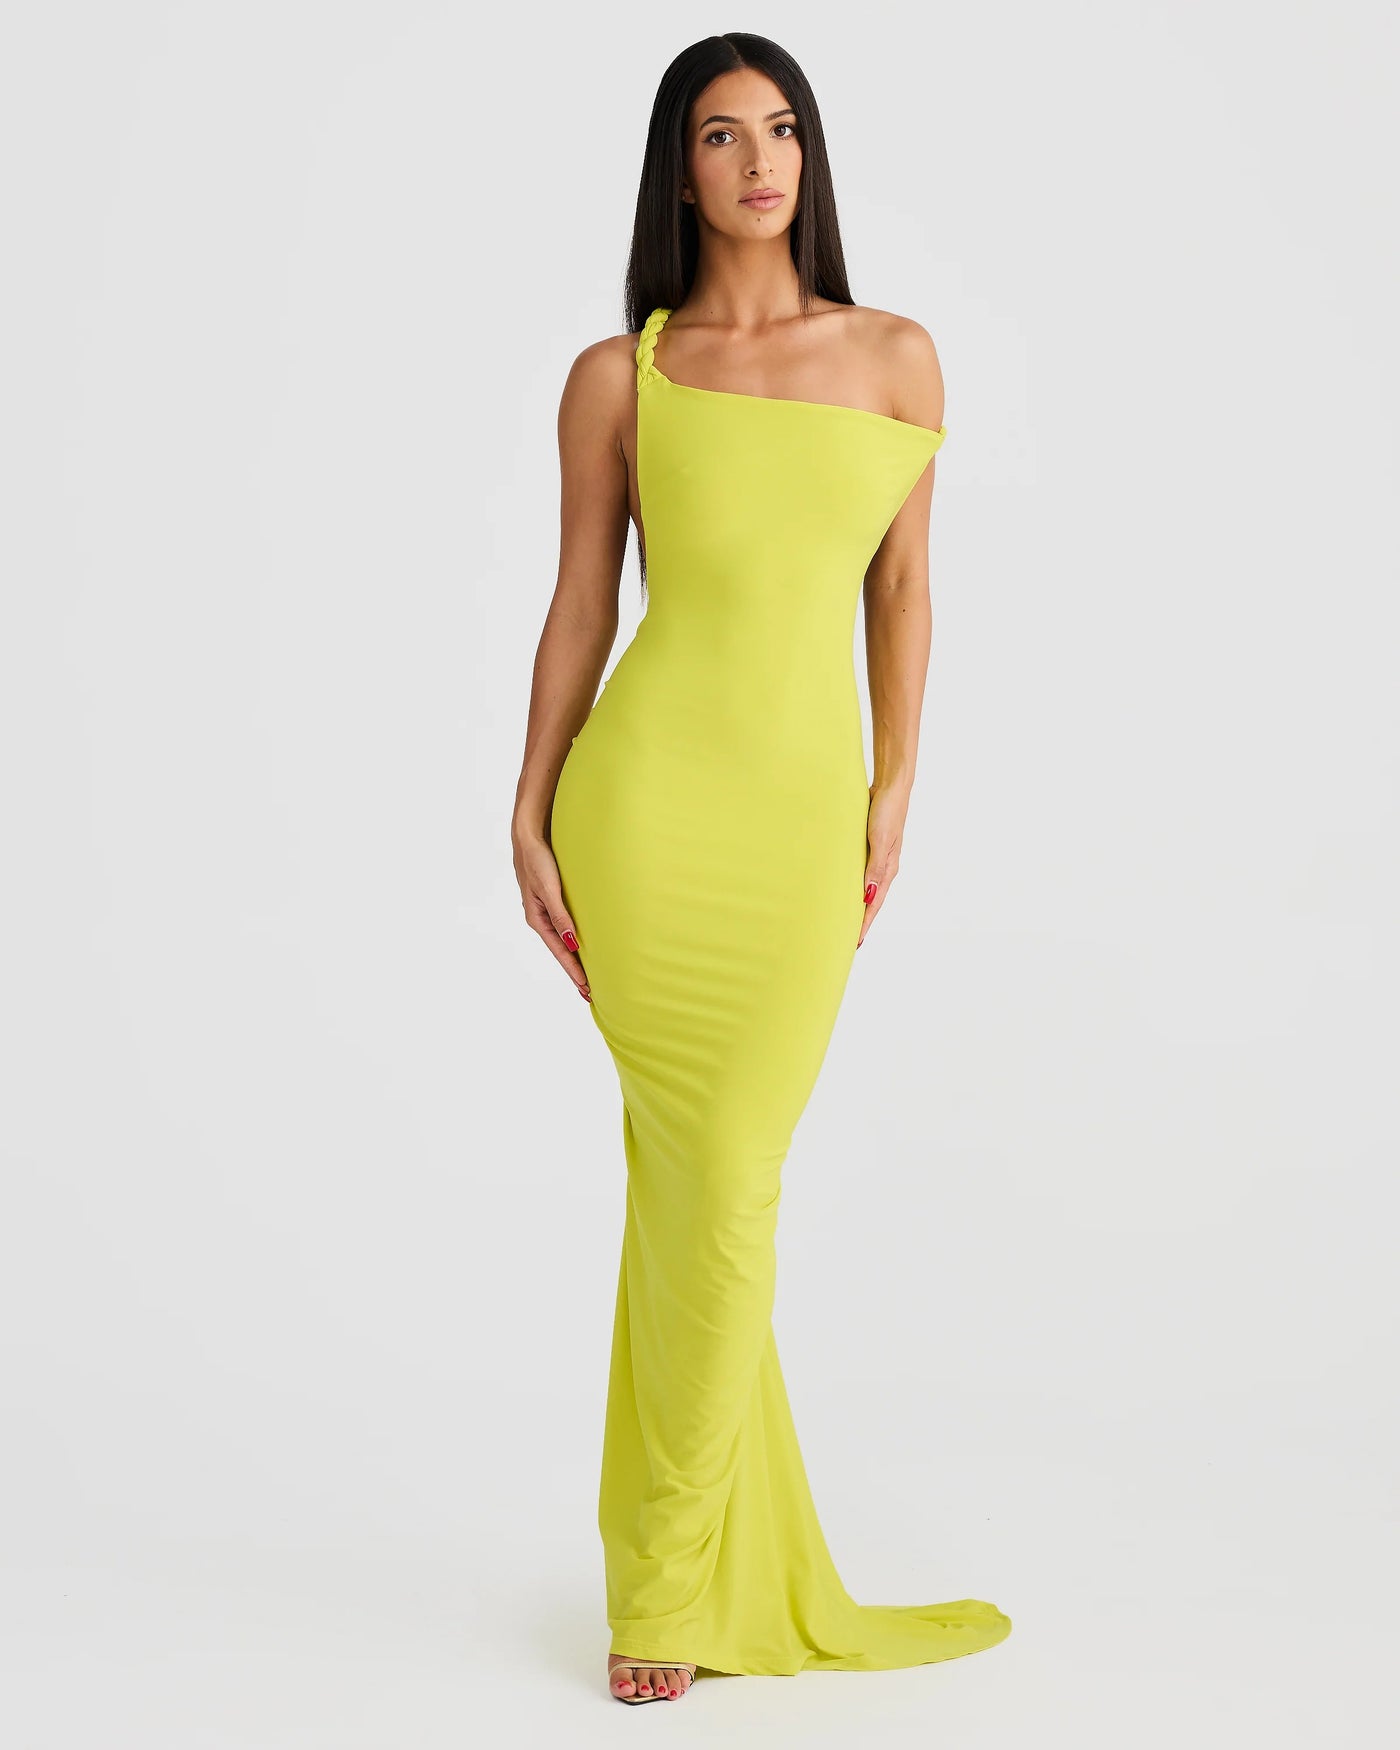 Maia Multi-Way Gown - Chartreuse - SHOPJAUS - JAUS